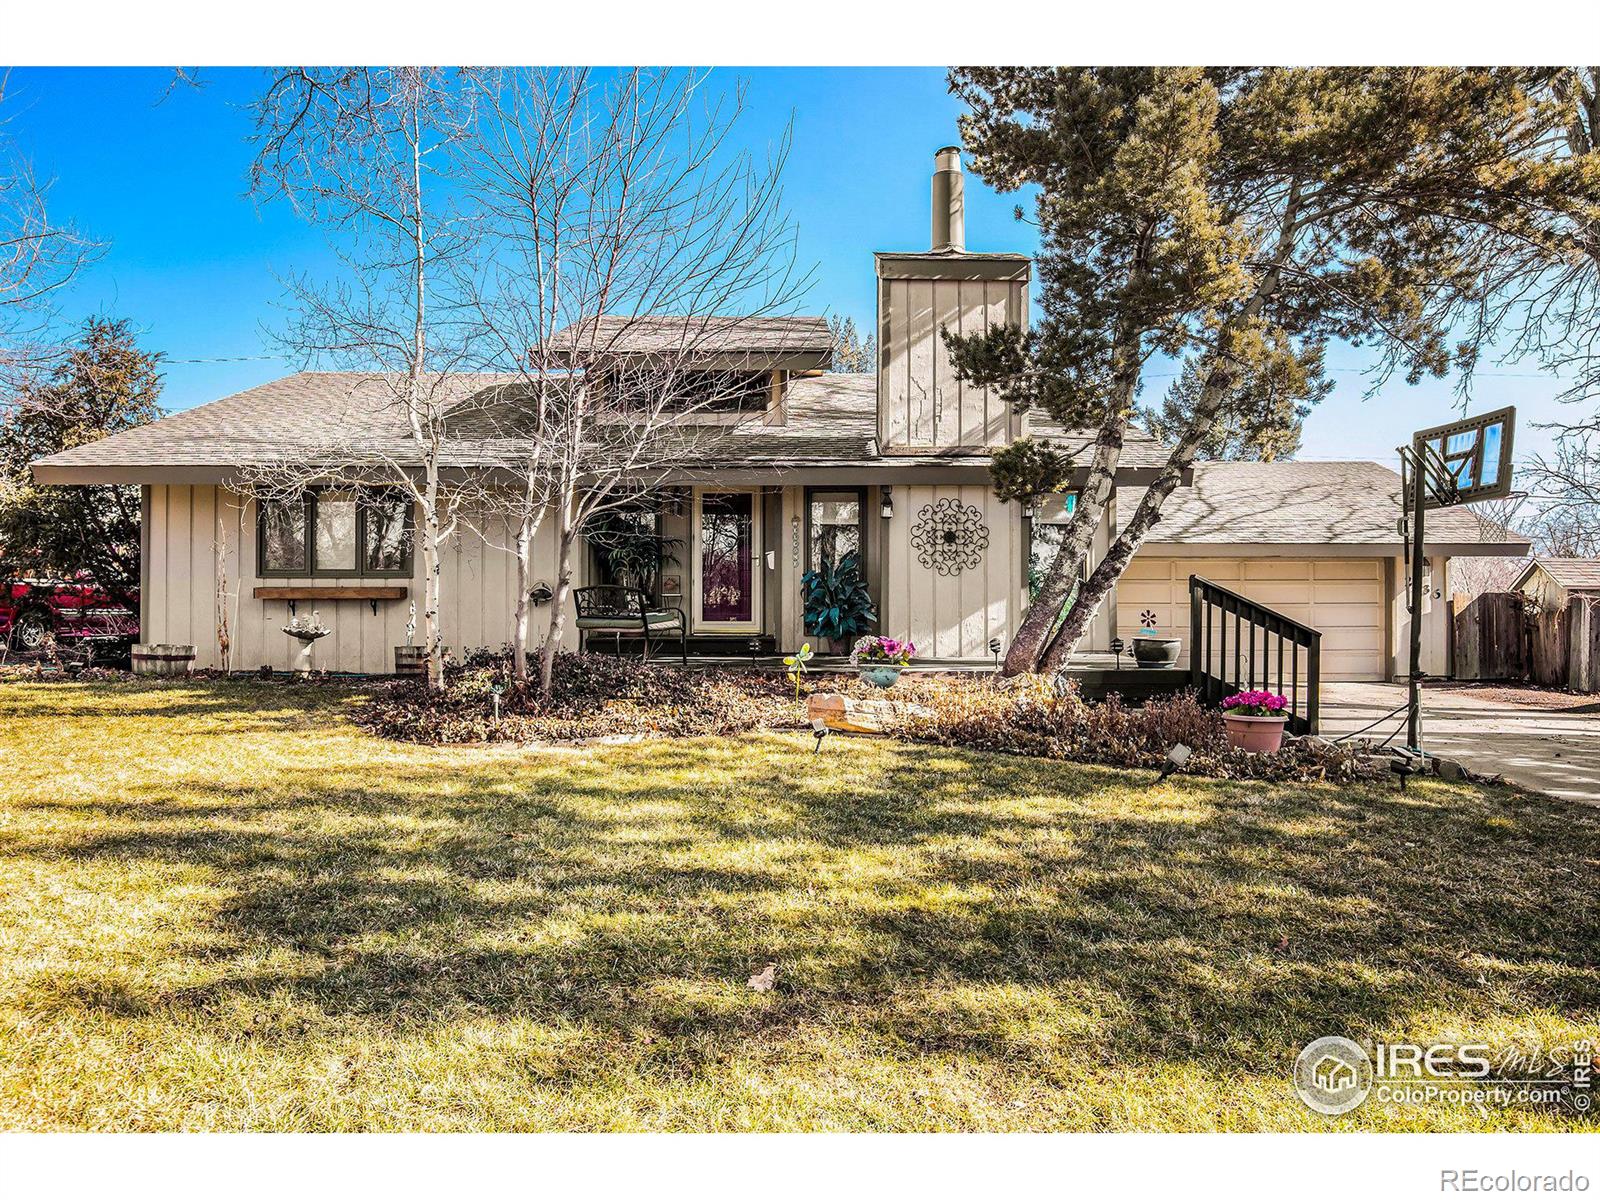 2536  23rd Avenue, greeley MLS: 4567891003013 Beds: 4 Baths: 2 Price: $399,900